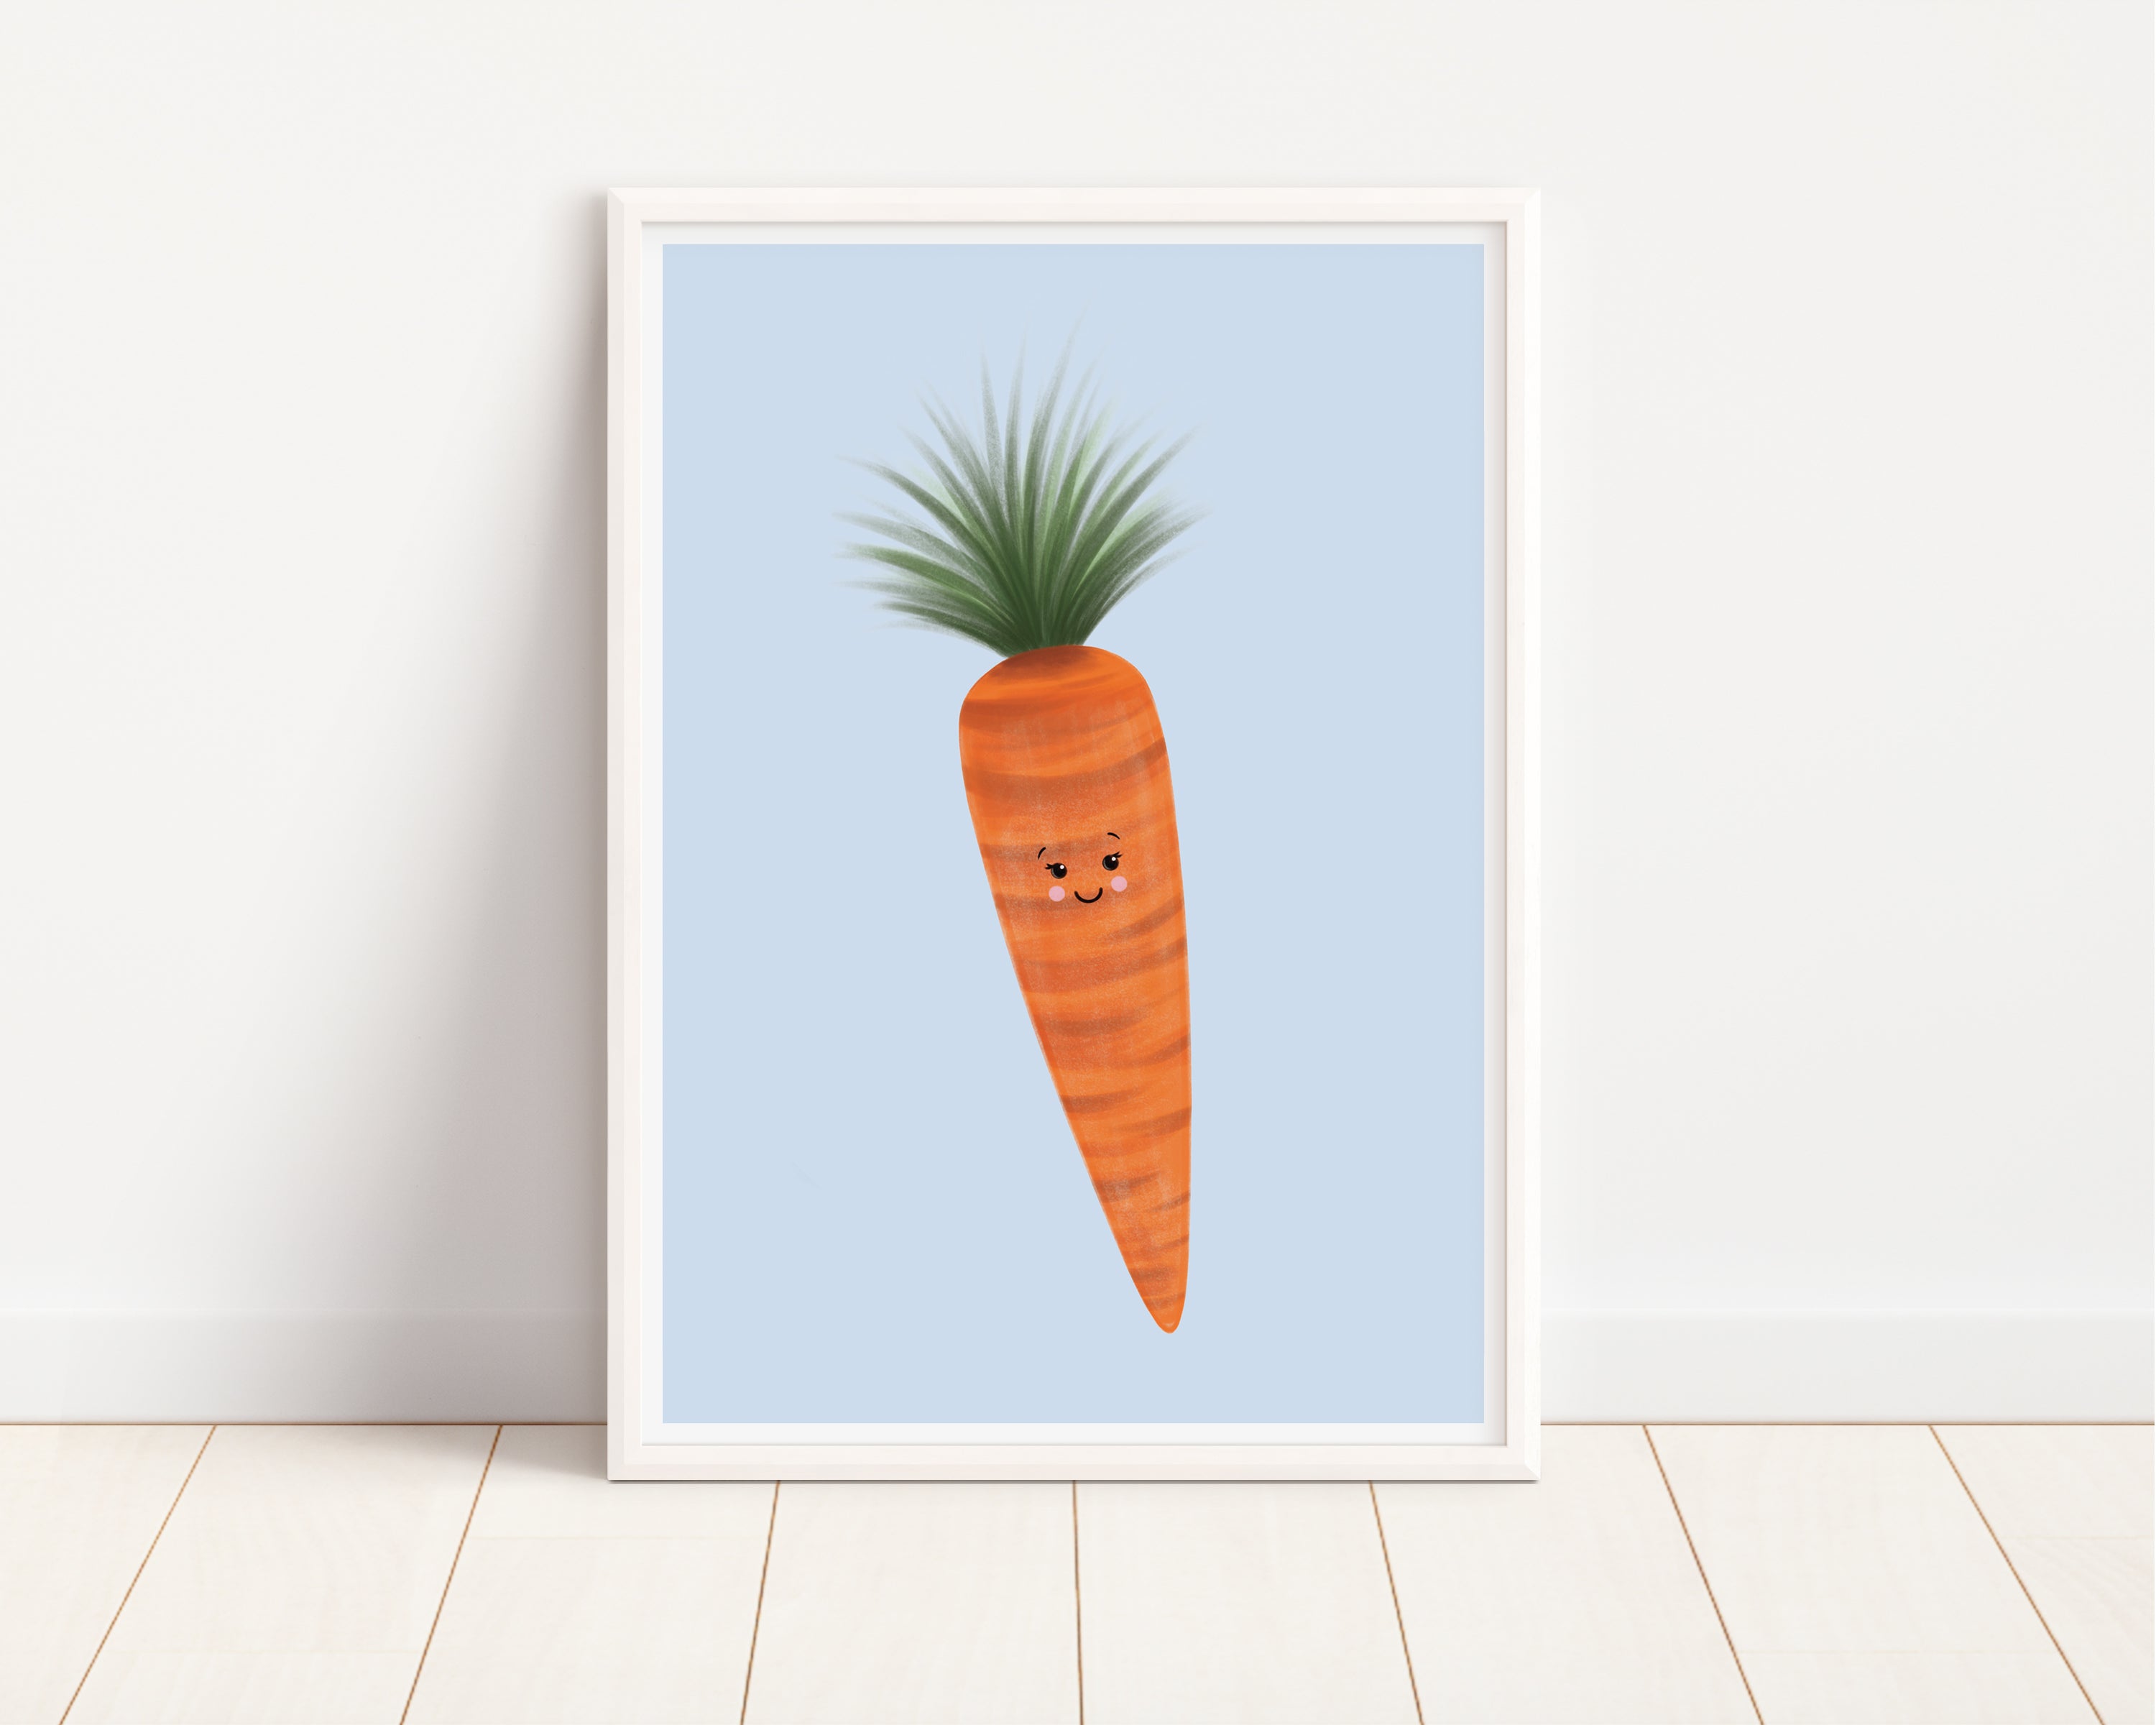 How To Draw A Funny Carrot - YouTube